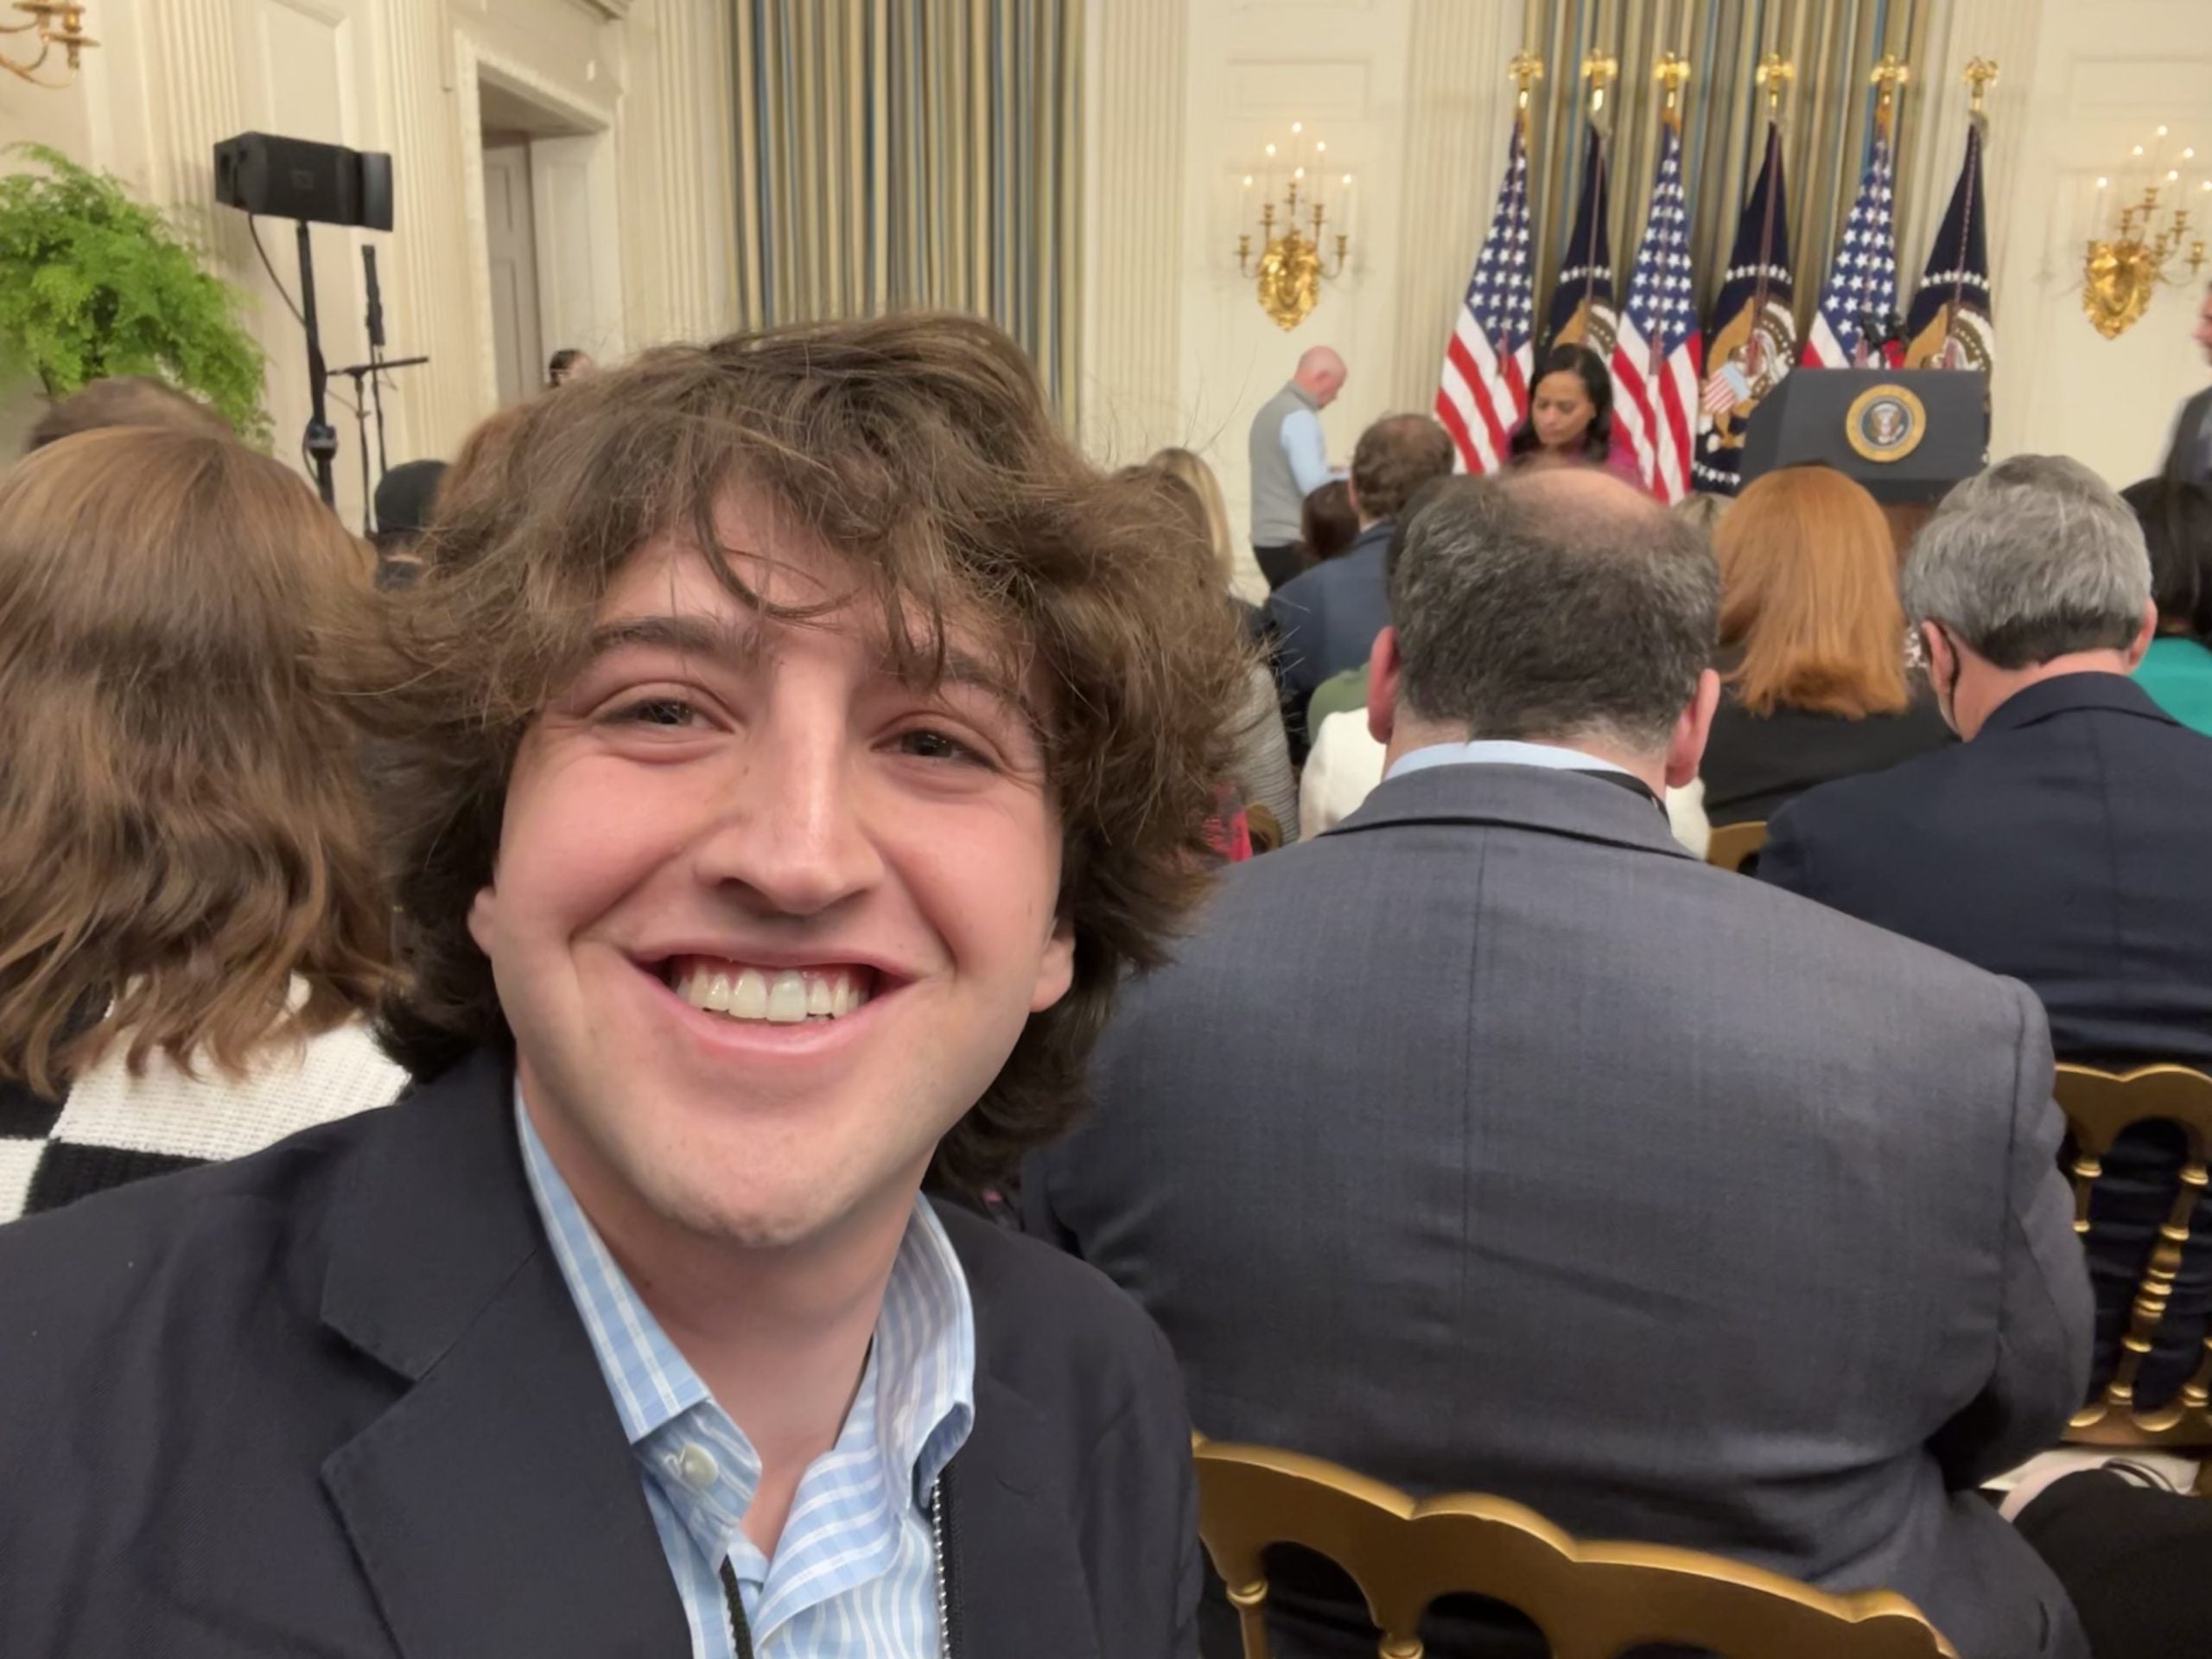 A selfie of Fleisher with the White House Press Corps and the podium of the president behind him.